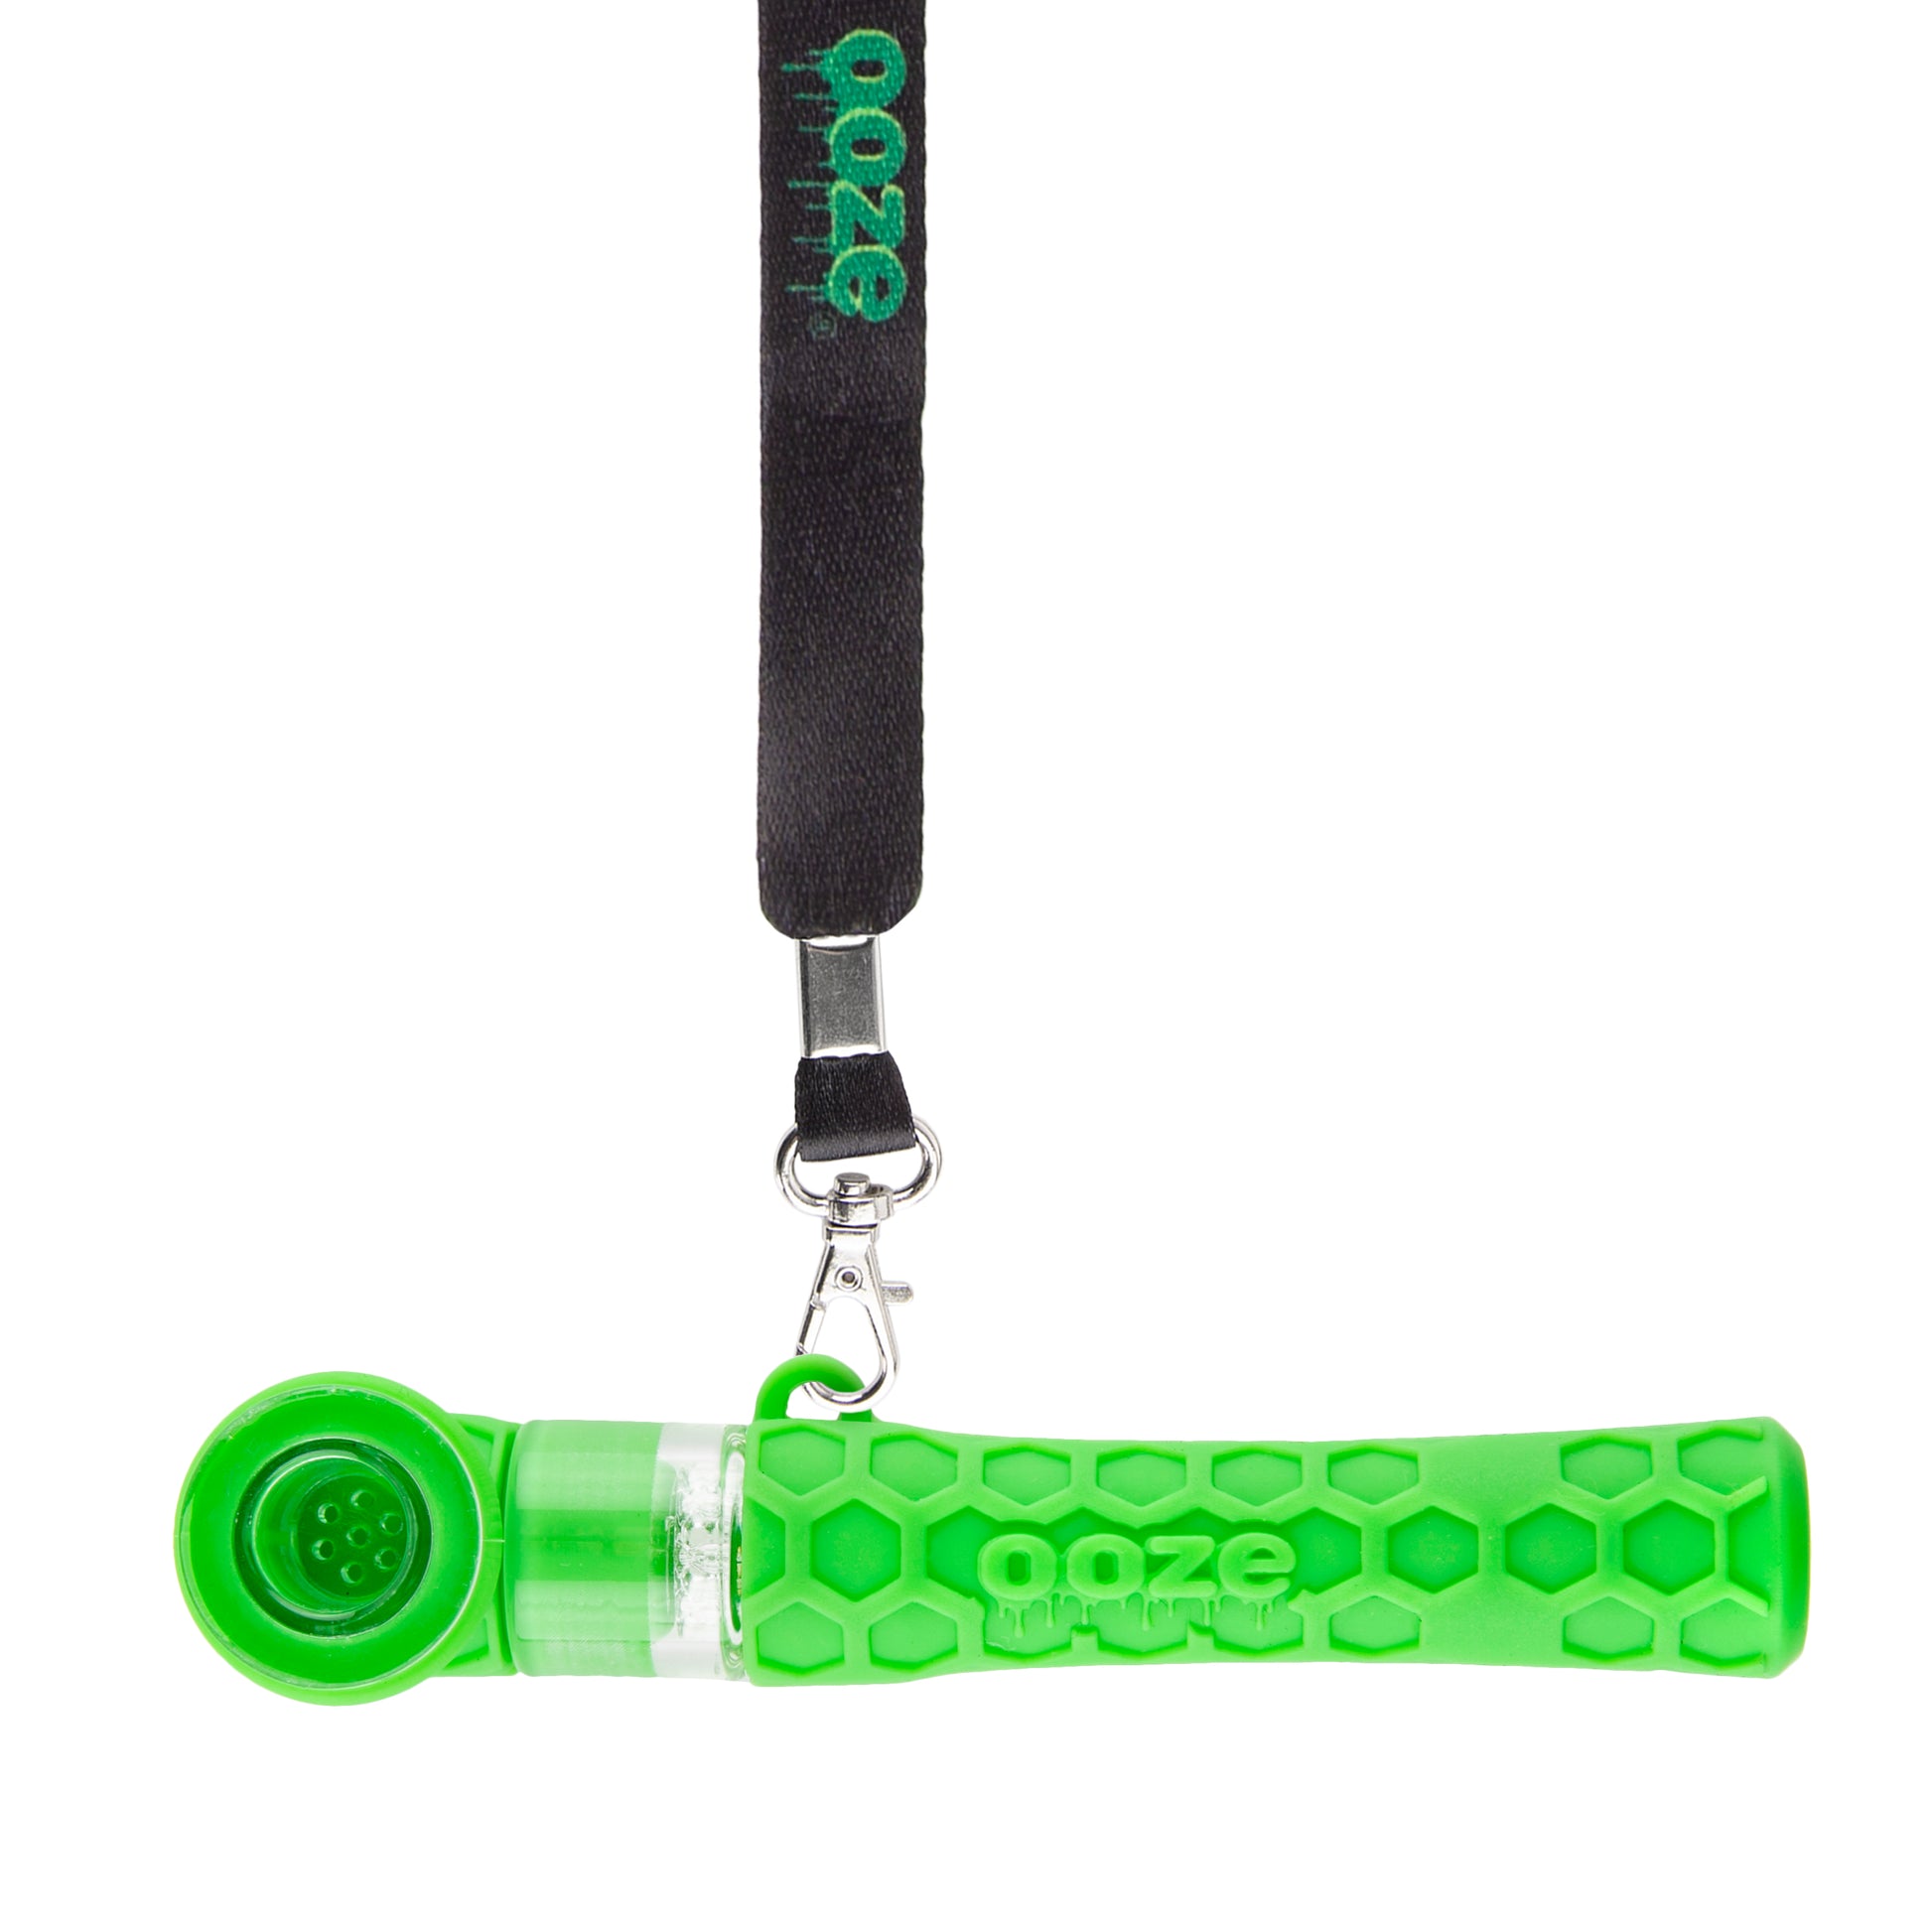 Ooze Hand Pipe - Piper - Green